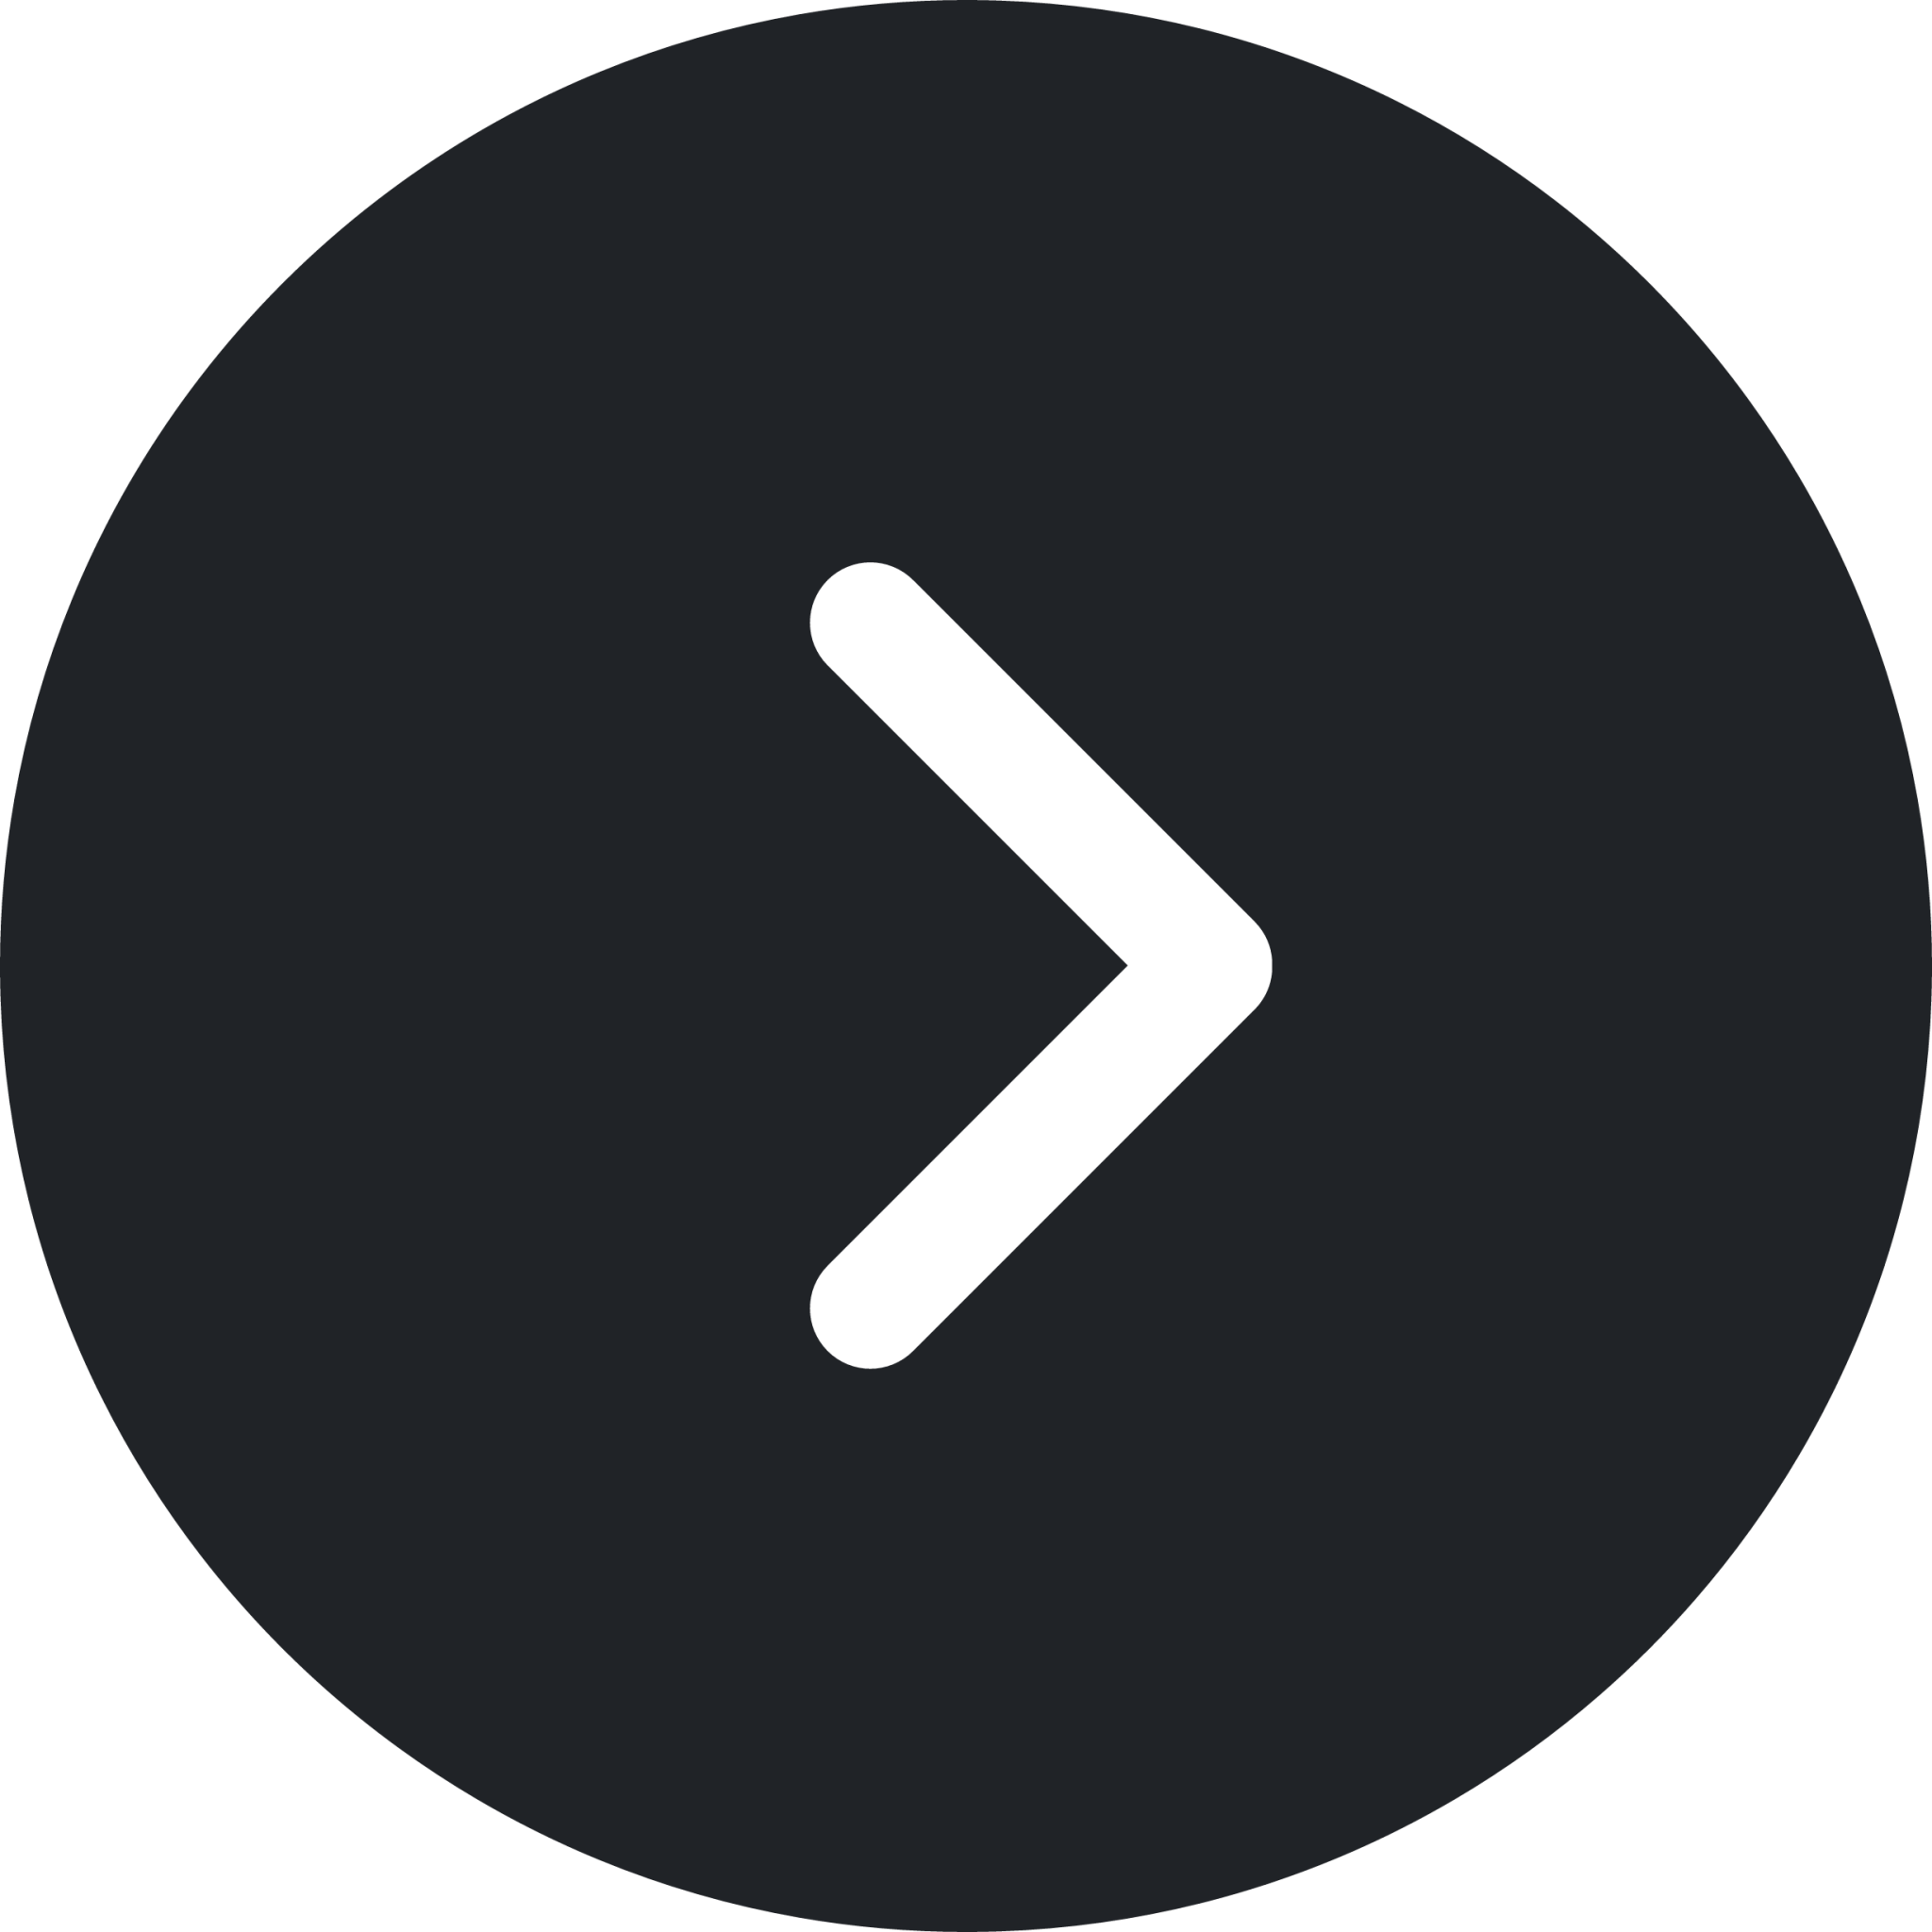 right (rounded filled) icon